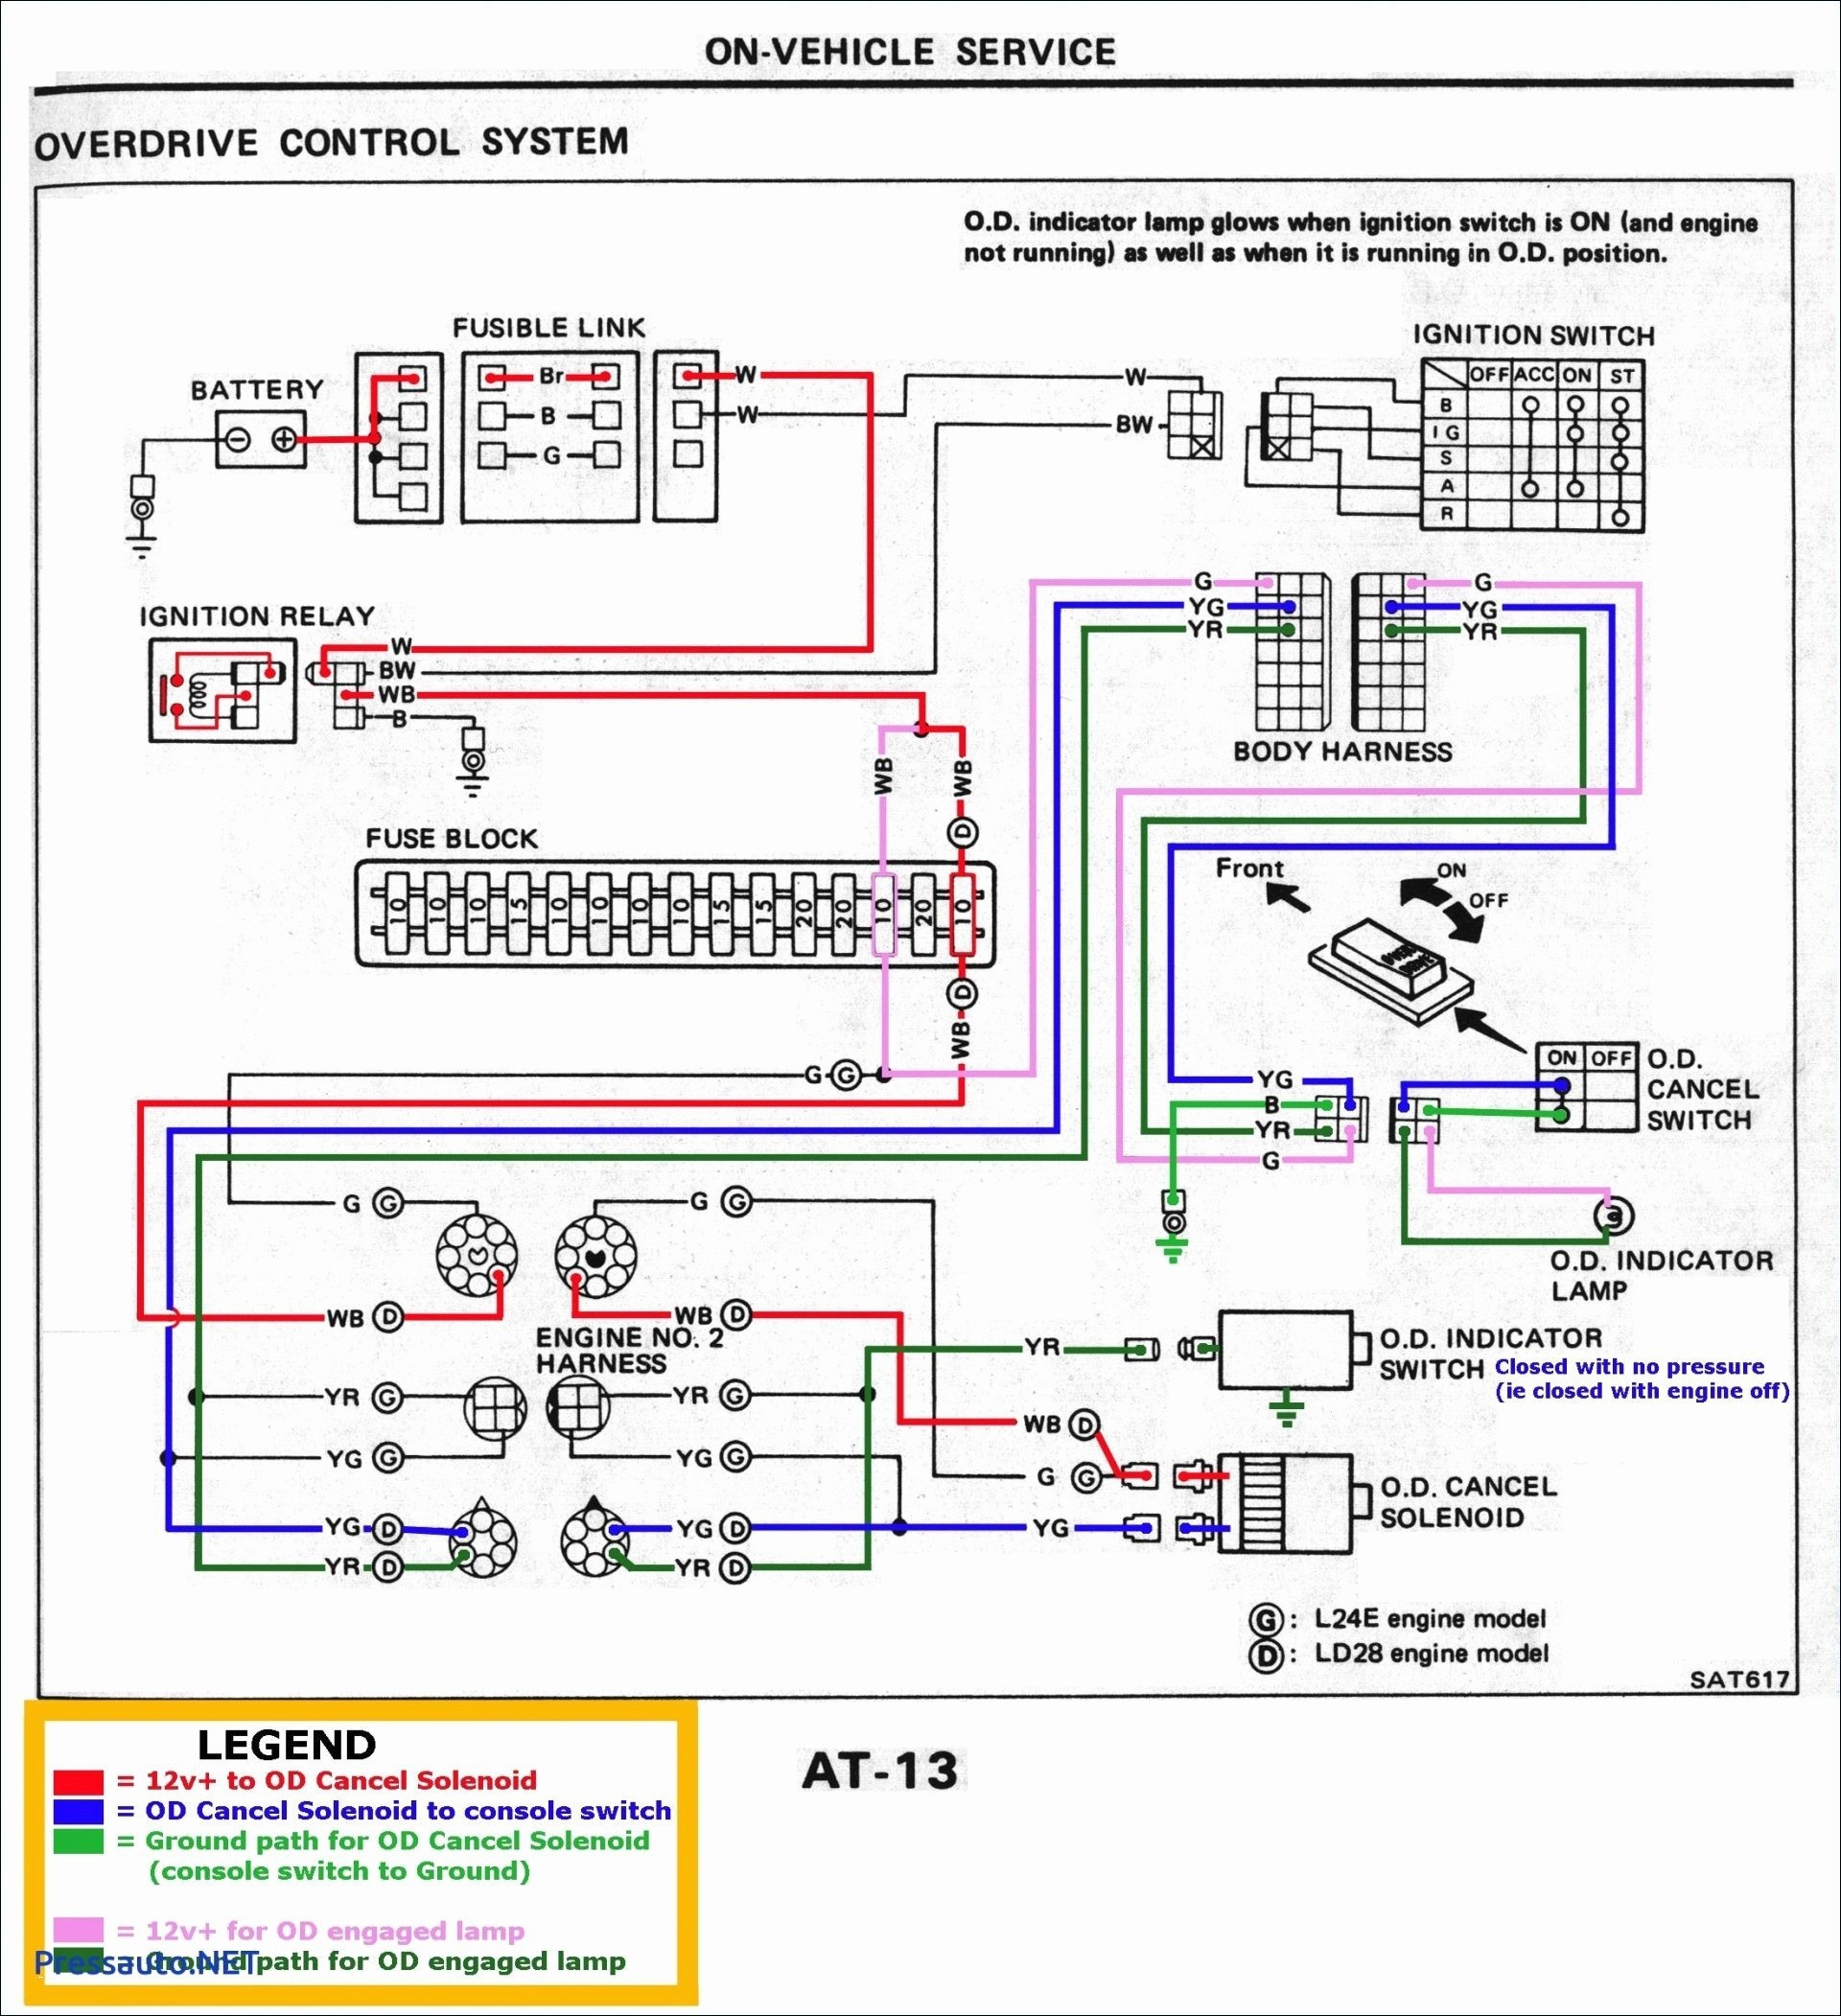 Car Capacitor Wiring Diagram Ignition Coil Condenser Wiring Diagram 2018 Automotive Coil Wiring Of Car Capacitor Wiring Diagram